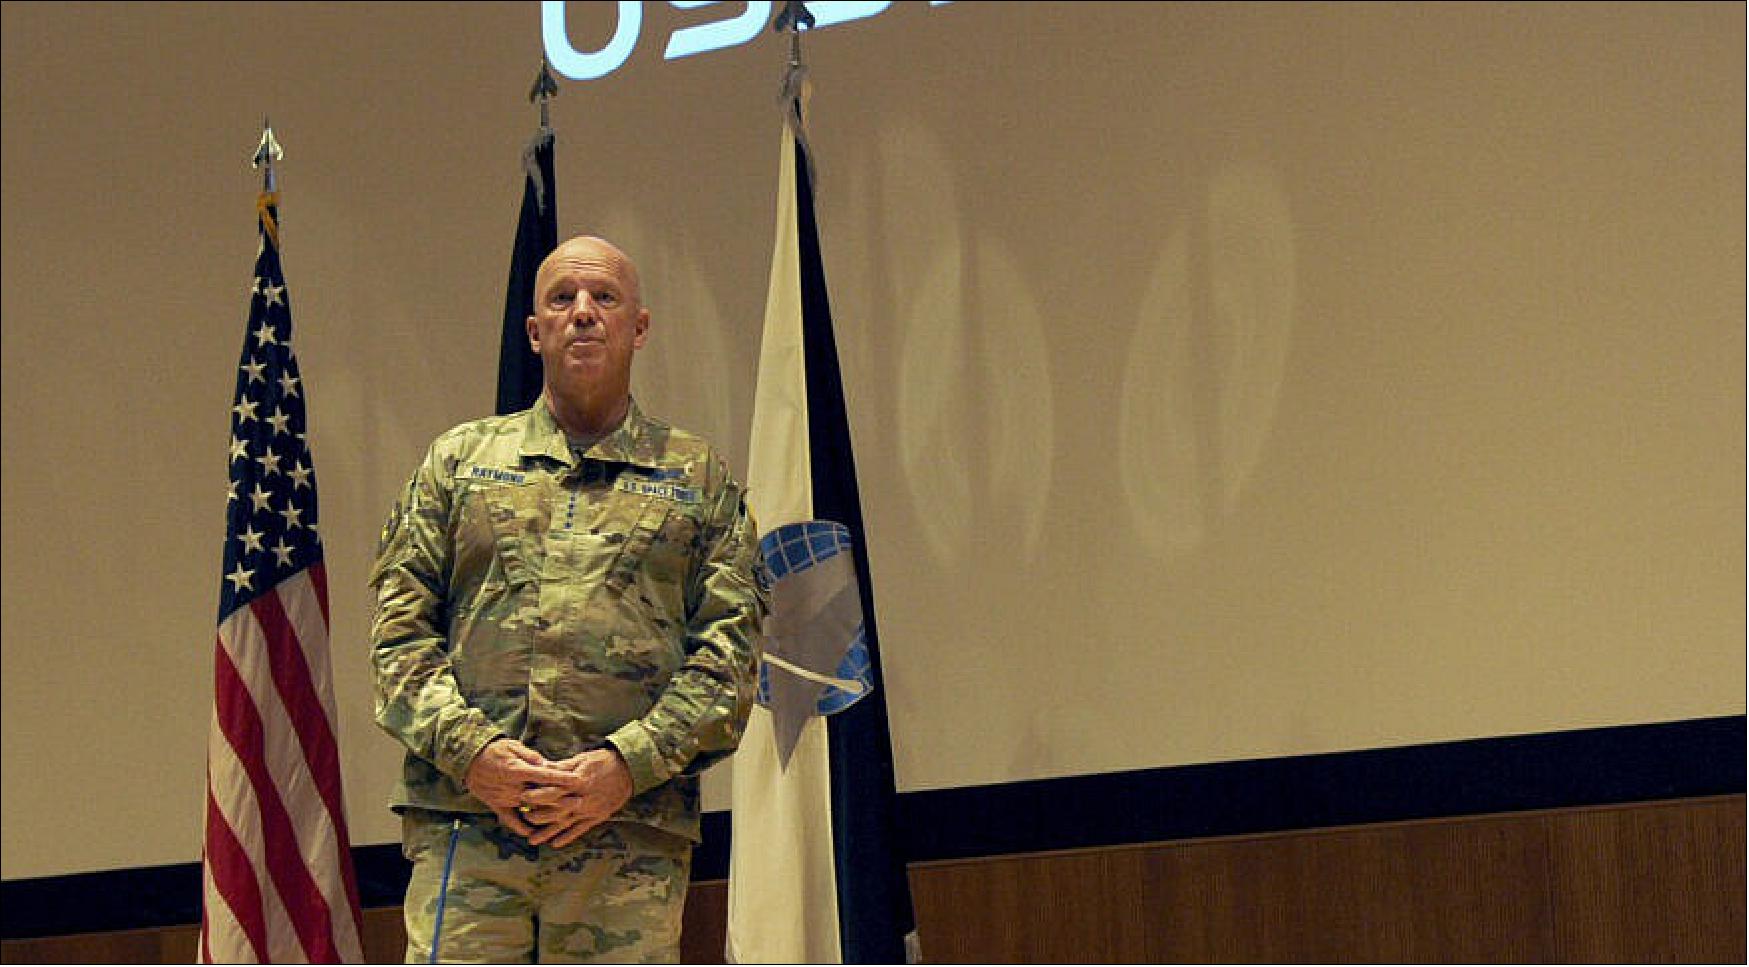 Figure 6: U.S. Space Force Gen. John "Jay" Raymond, chief of space operations, speaks at the National Air and Space Intelligence Center (image credit: U.S. Air Force)